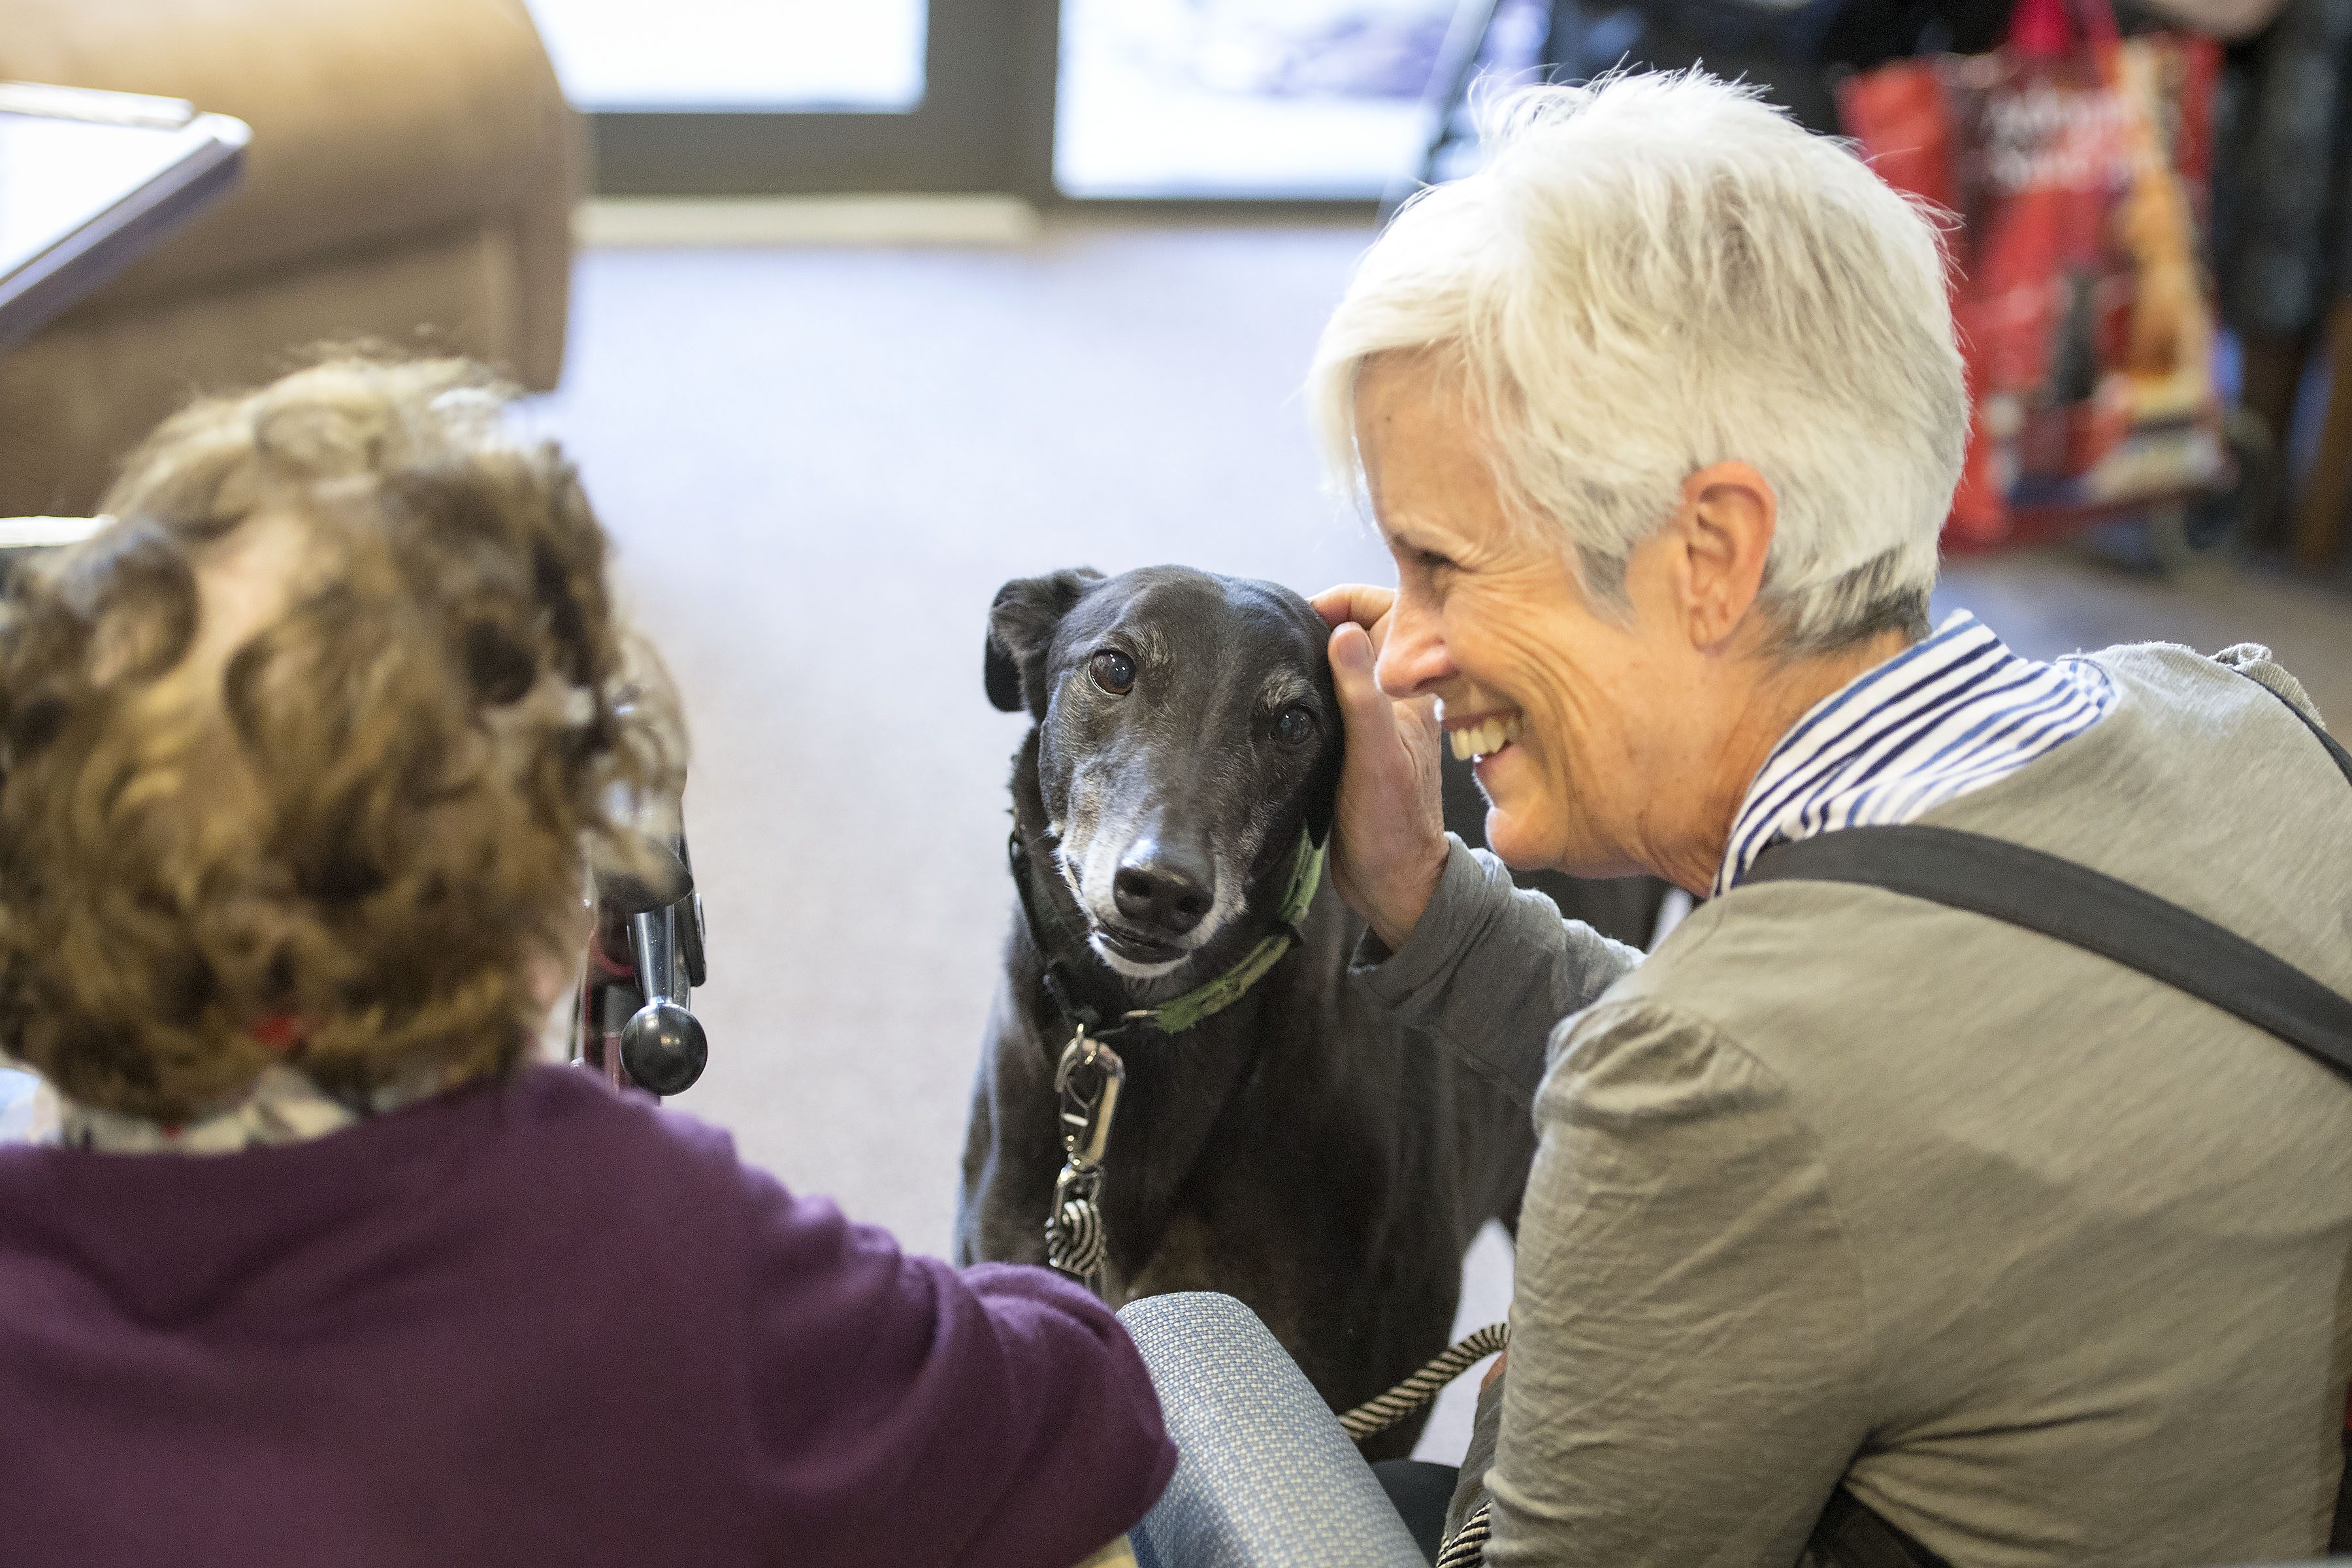 Greyhounds as Therapy Dogs - Greyhounds as Pets